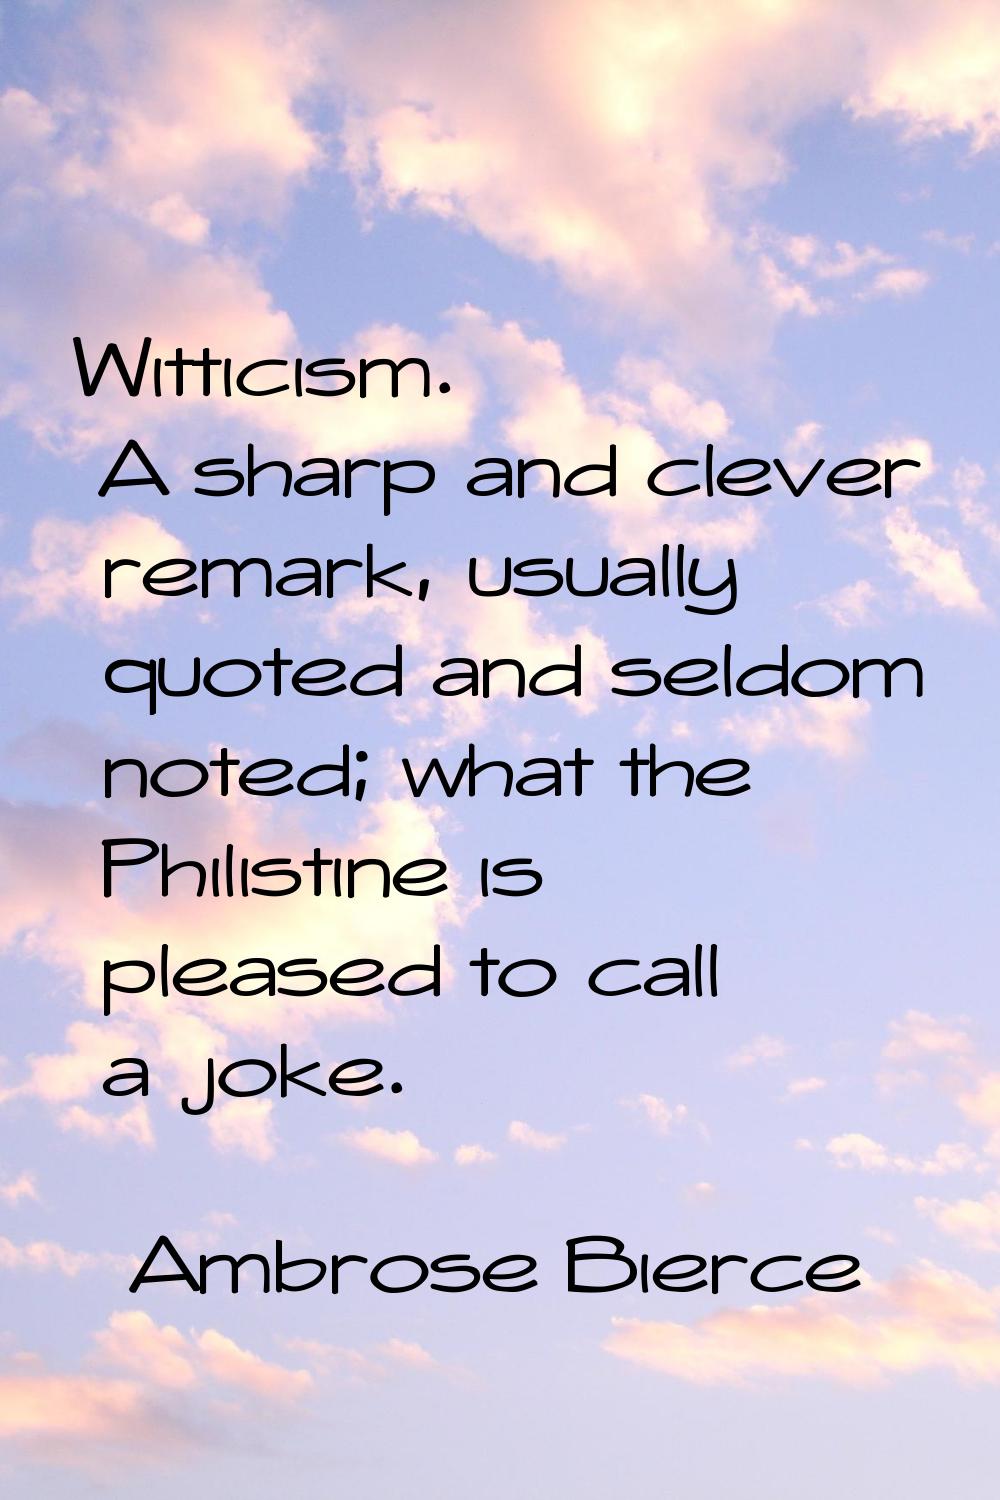 Witticism. A sharp and clever remark, usually quoted and seldom noted; what the Philistine is pleas